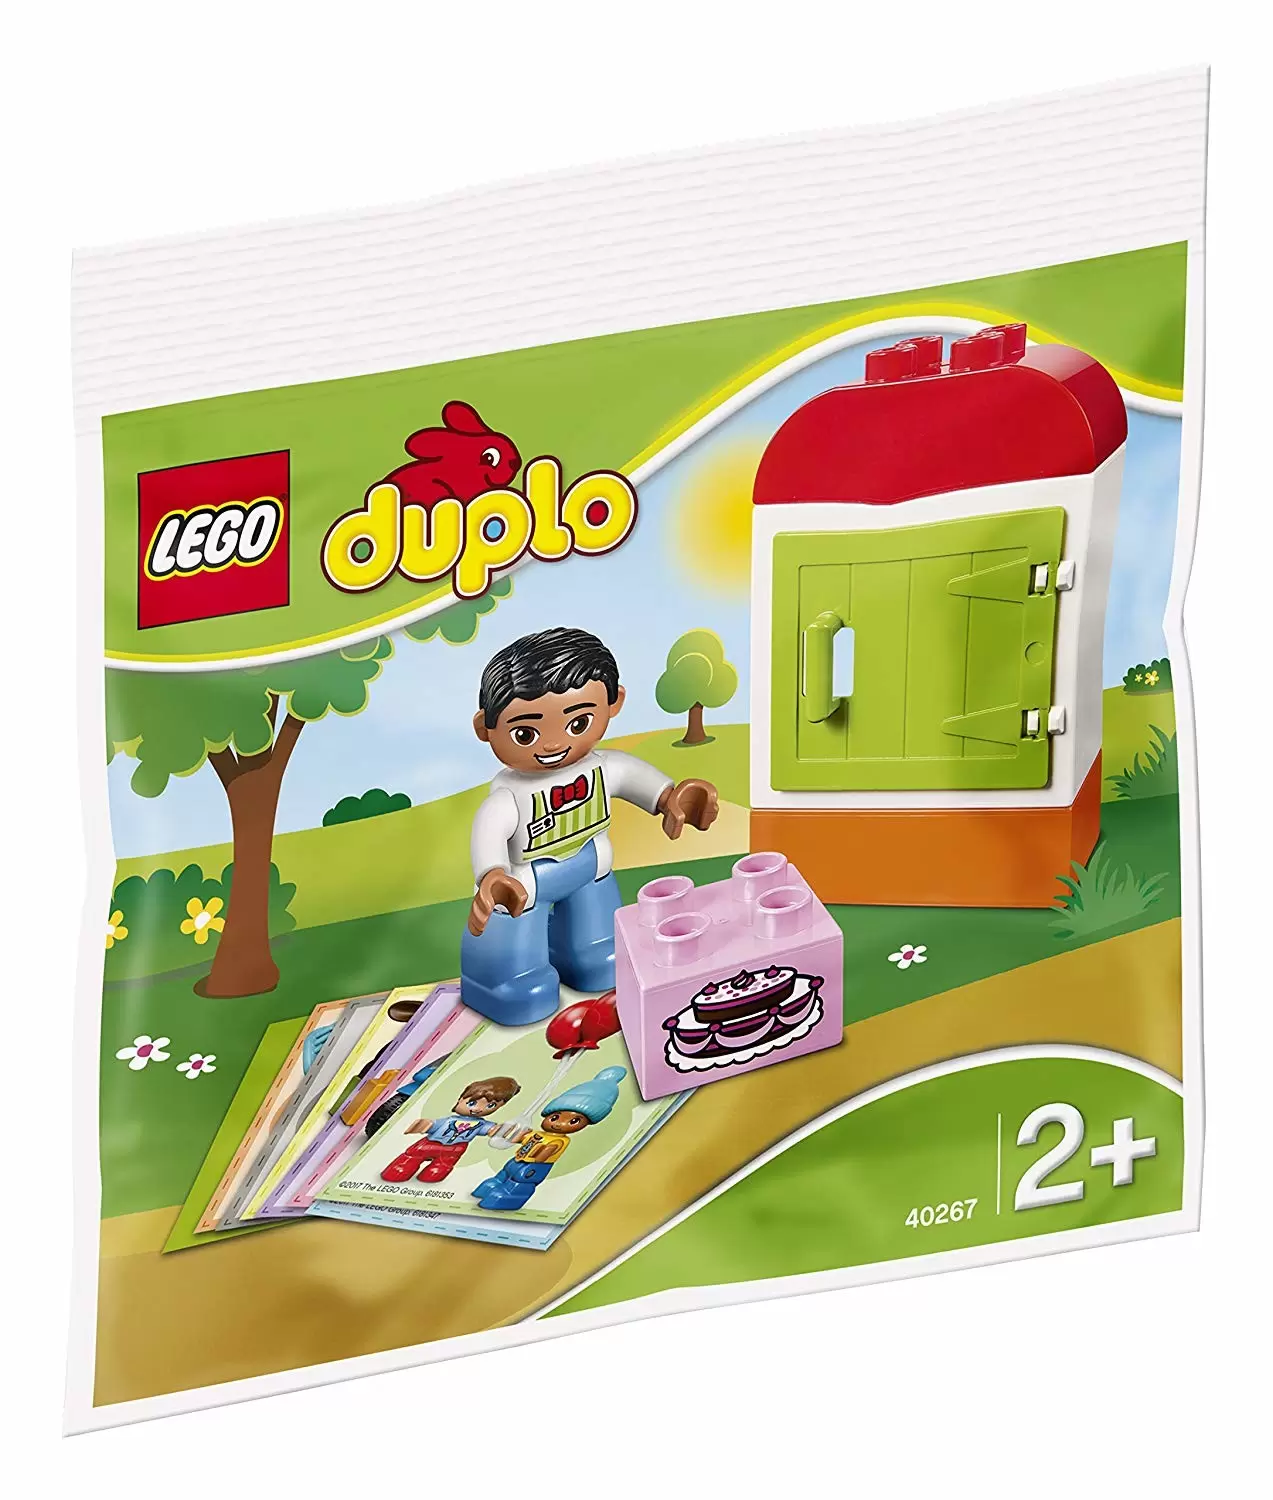 LEGO Duplo - Find A Pair Pack